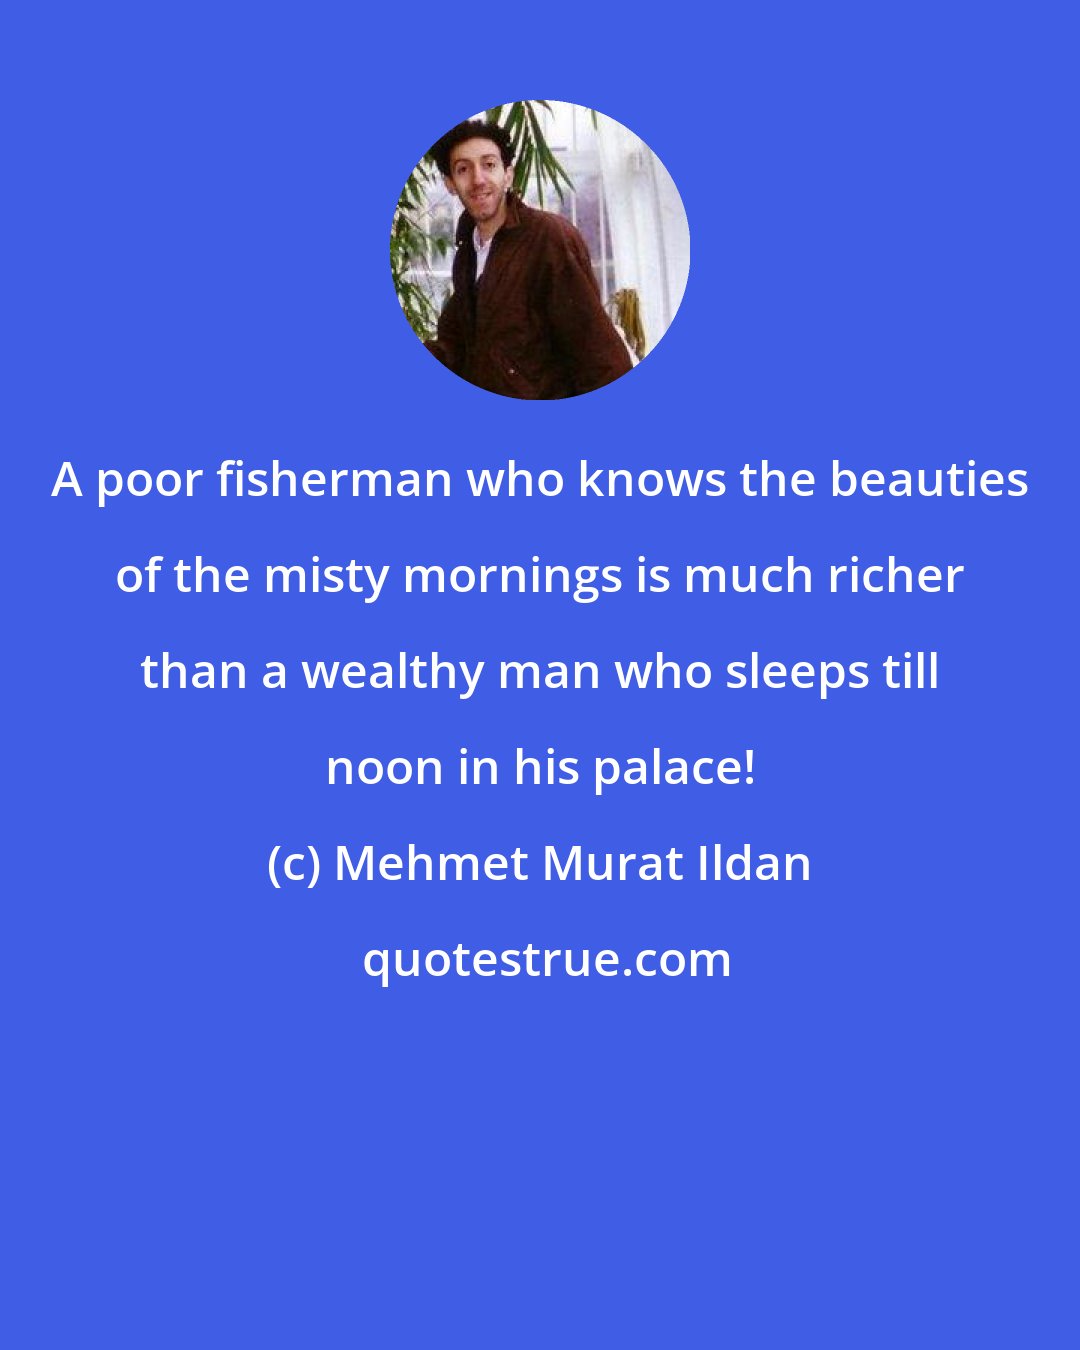 Mehmet Murat Ildan: A poor fisherman who knows the beauties of the misty mornings is much richer than a wealthy man who sleeps till noon in his palace!